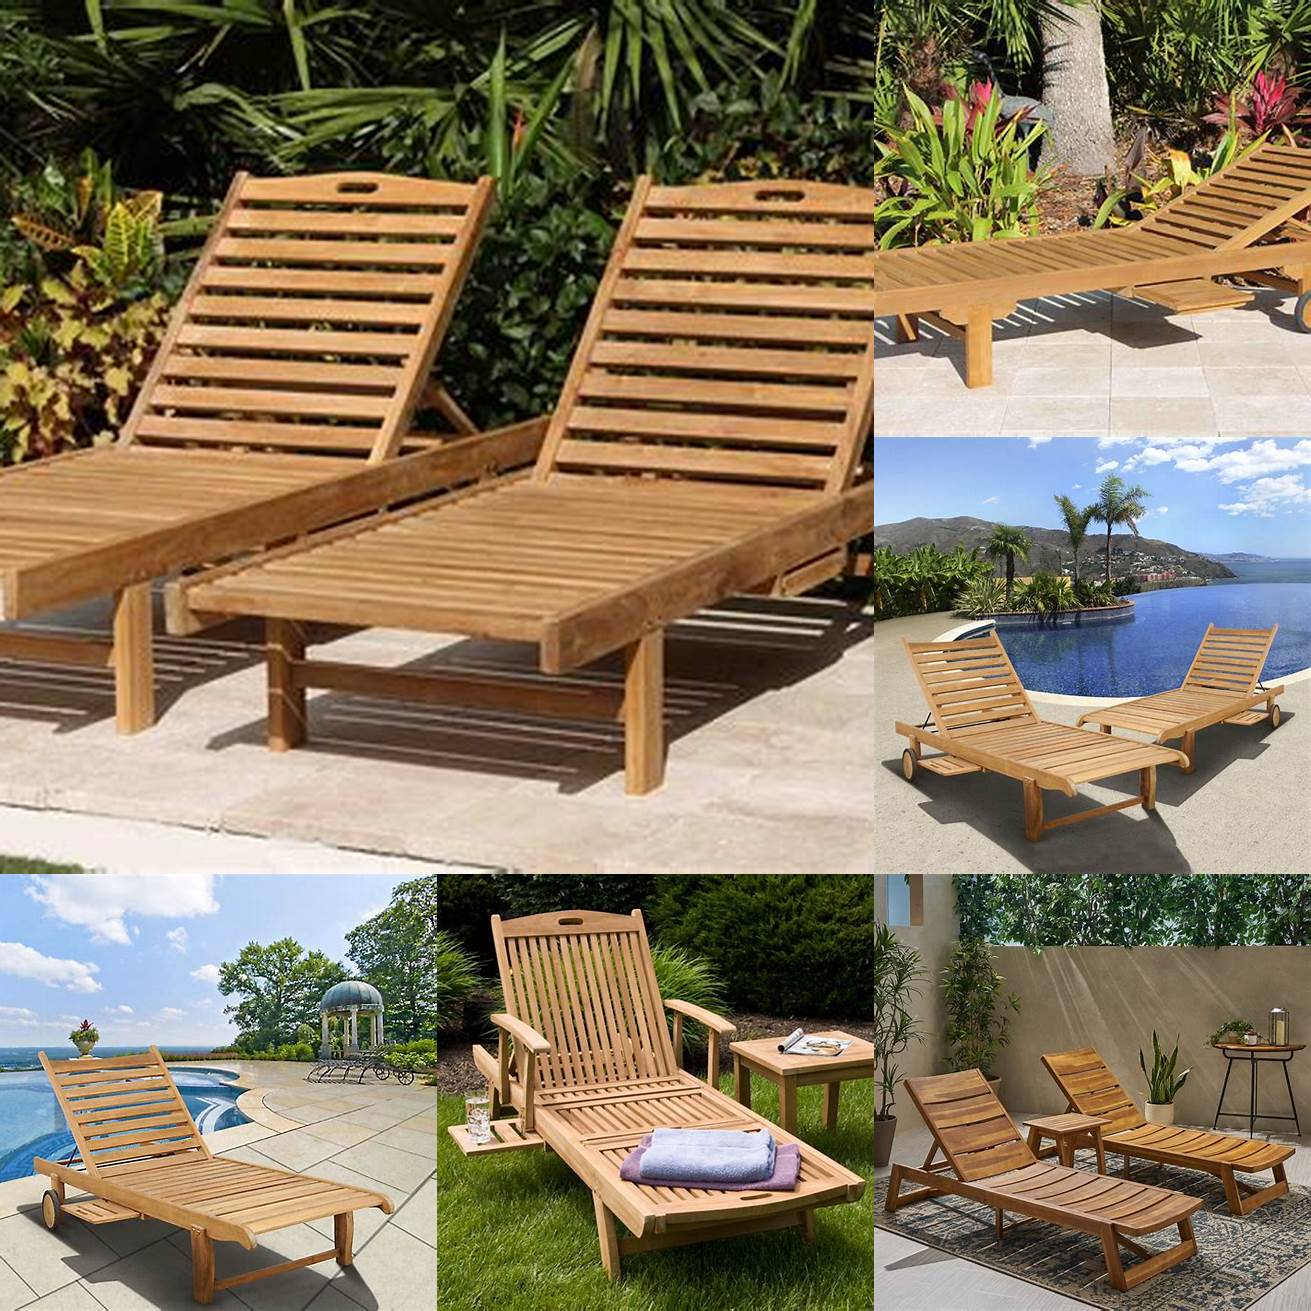 Teak Chaise Lounges for Sunbathing